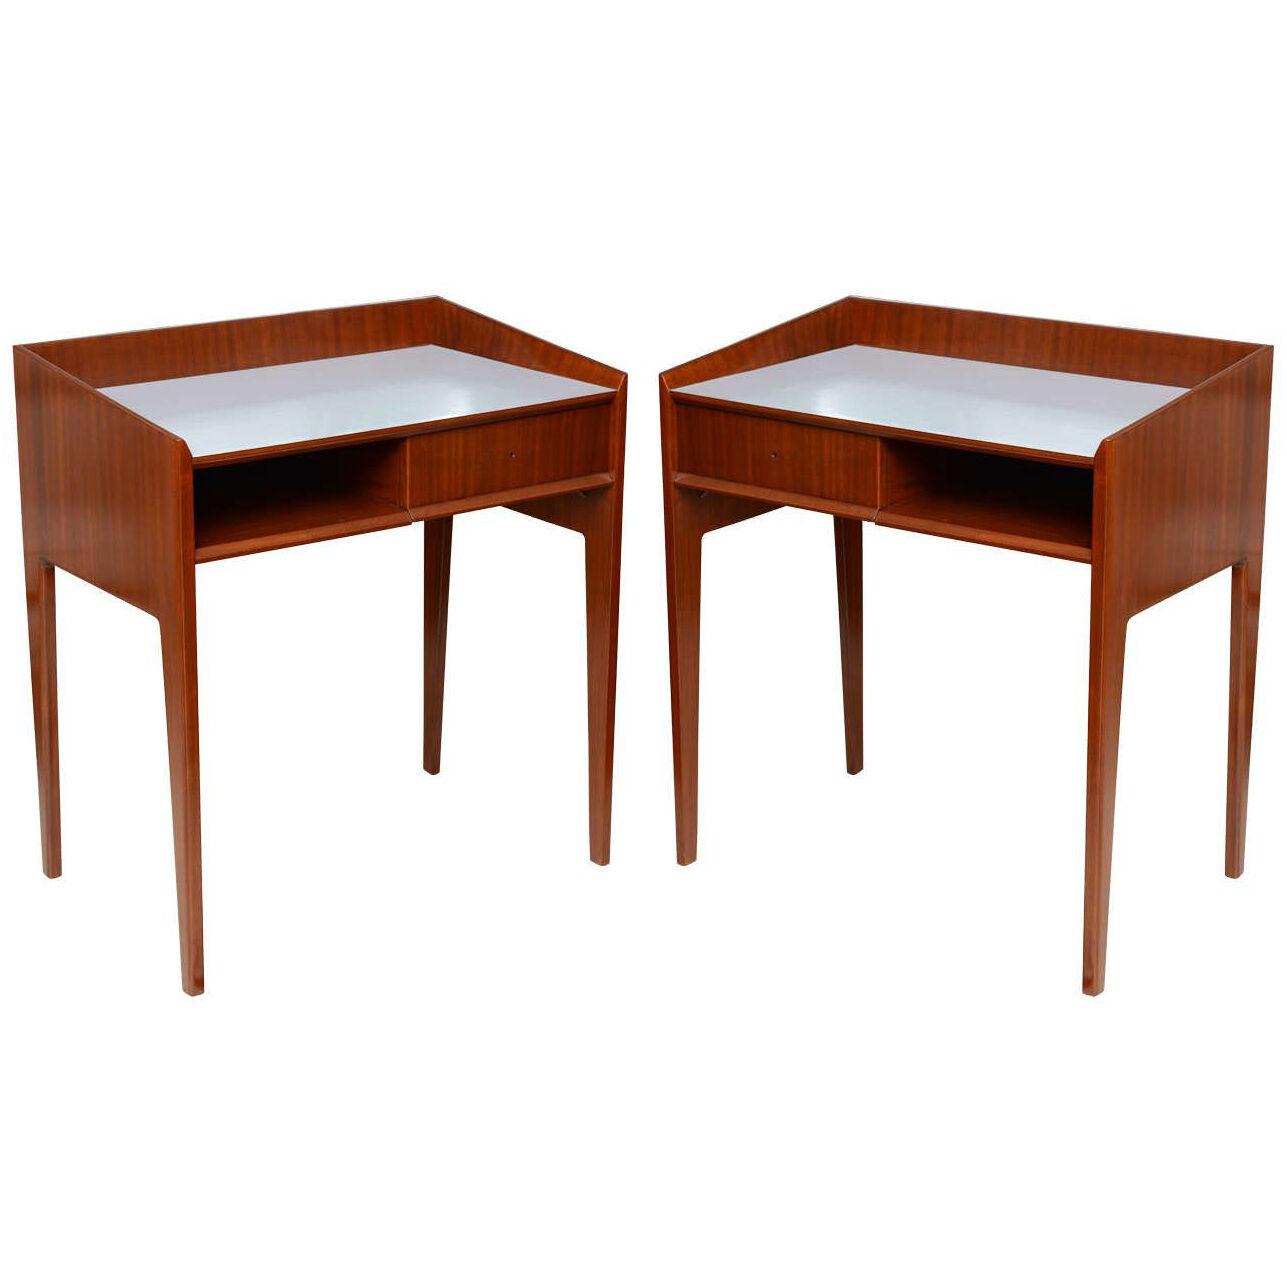 Rare Pair of Mahogany and Formica Side Tables in Style of Gio Ponti, Italy 1950s